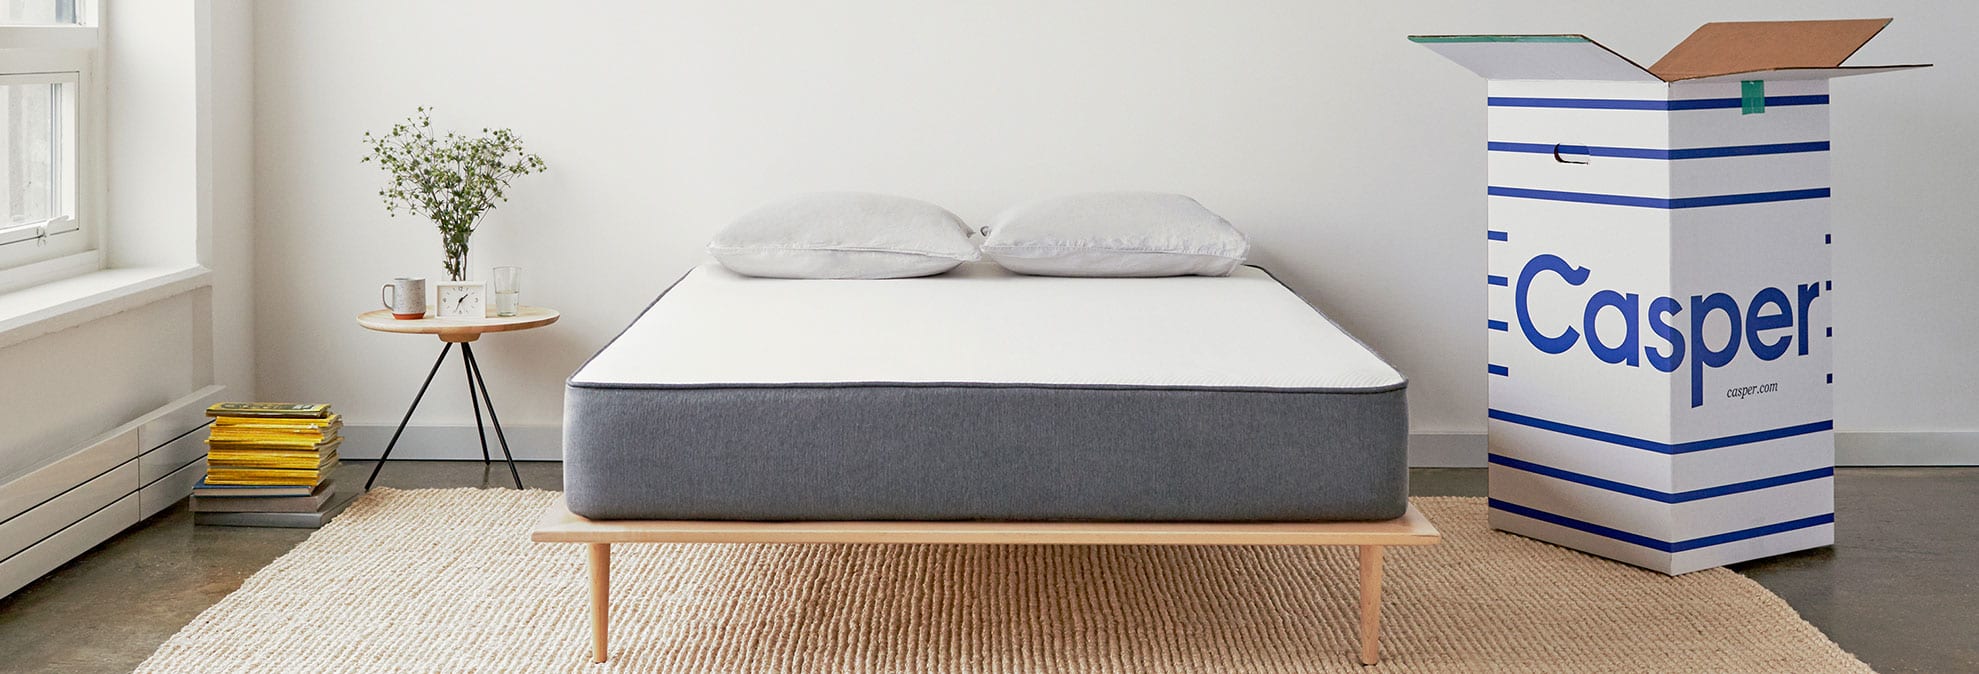 You Can Now Find Casper Mattresses at Target - ConsumerReports.org